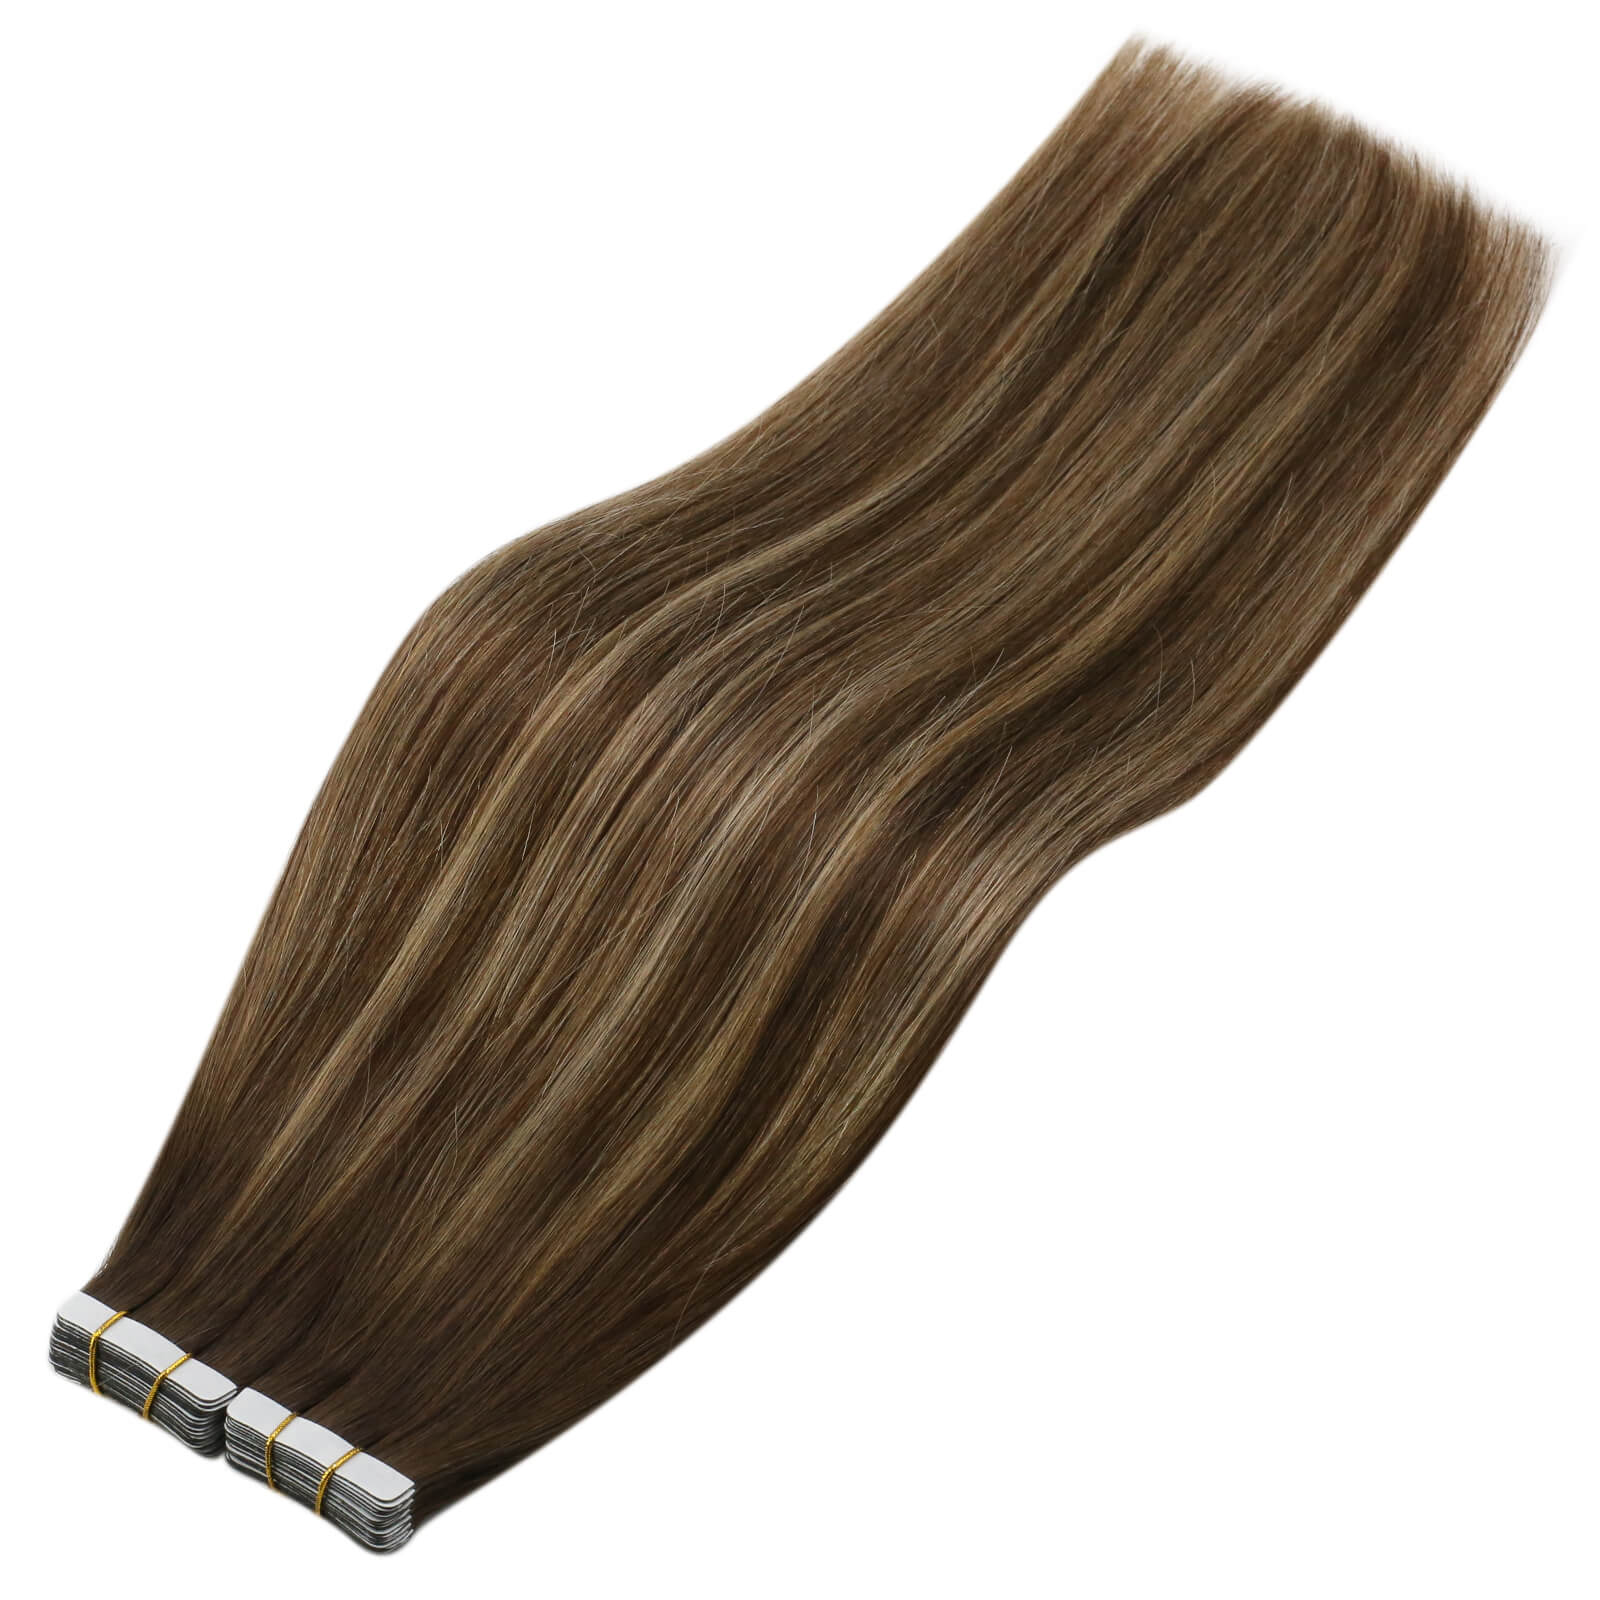 sunny  hair extensions best tape in hair extensions tape in human hair extensions hair extensions tape in tape in hair extensions human hair tape in extensions